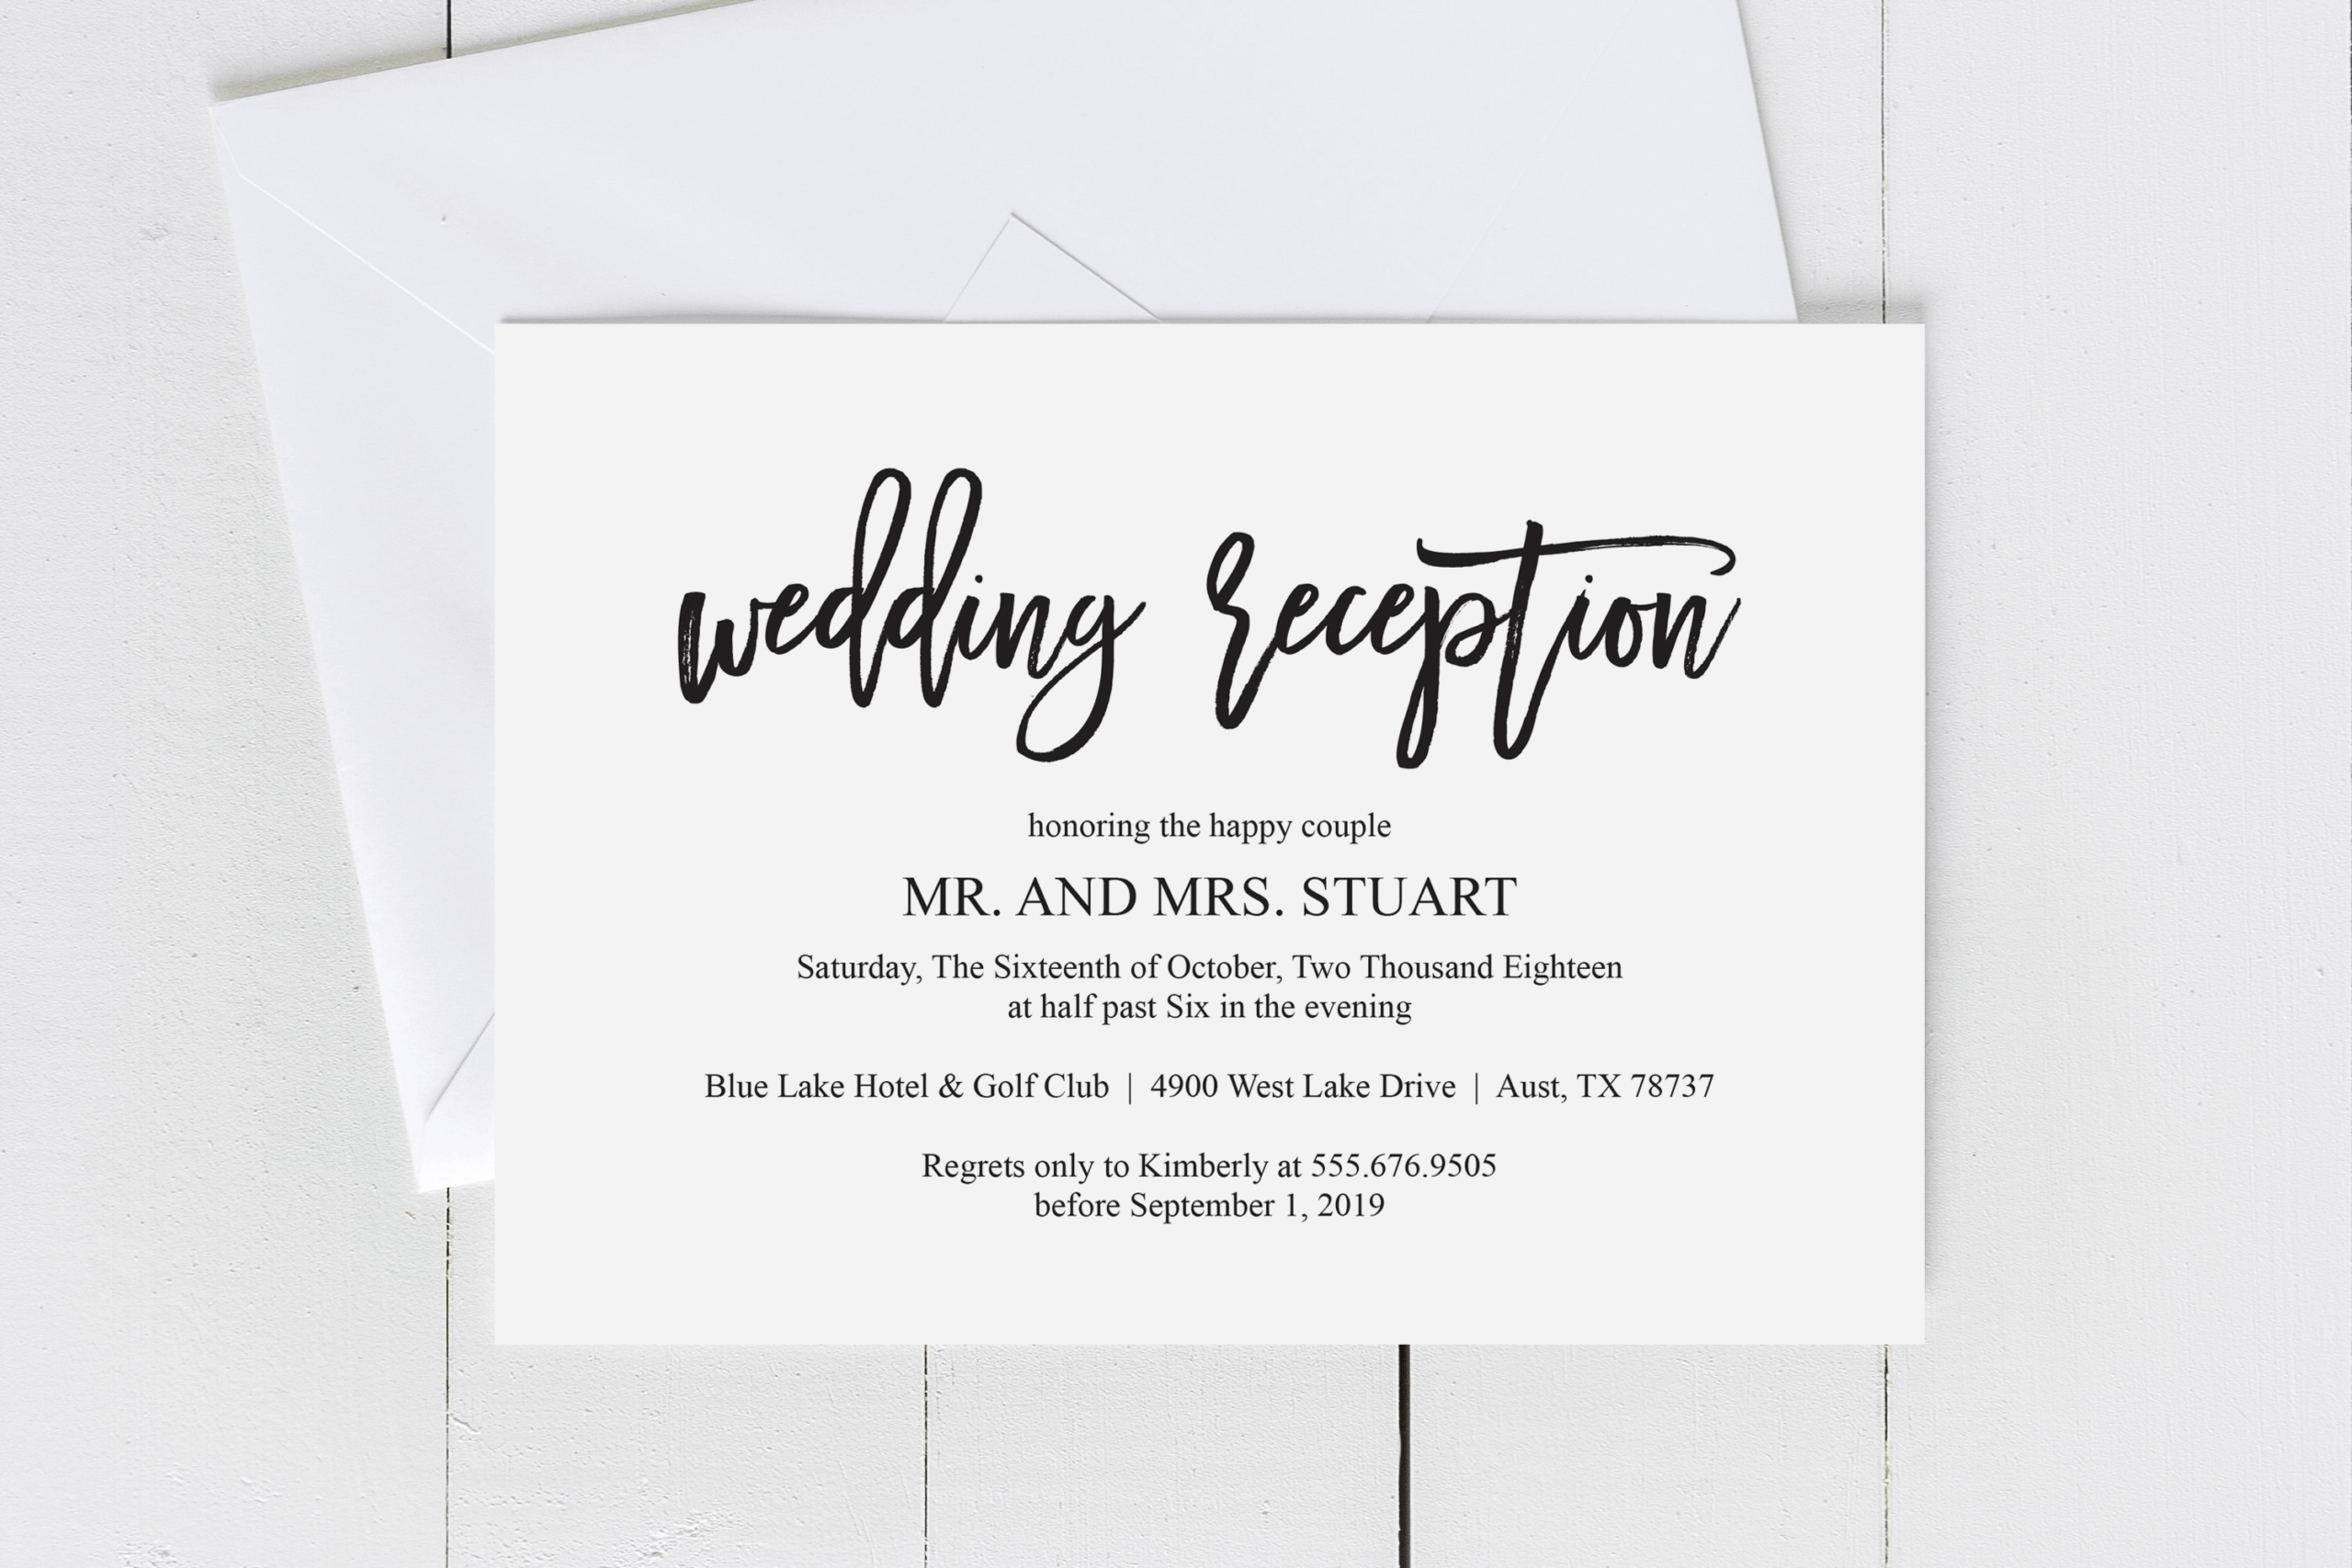 Wedding Reception Invitation Card Pdf Editable Template Intended For Wedding Hotel Information Card Template